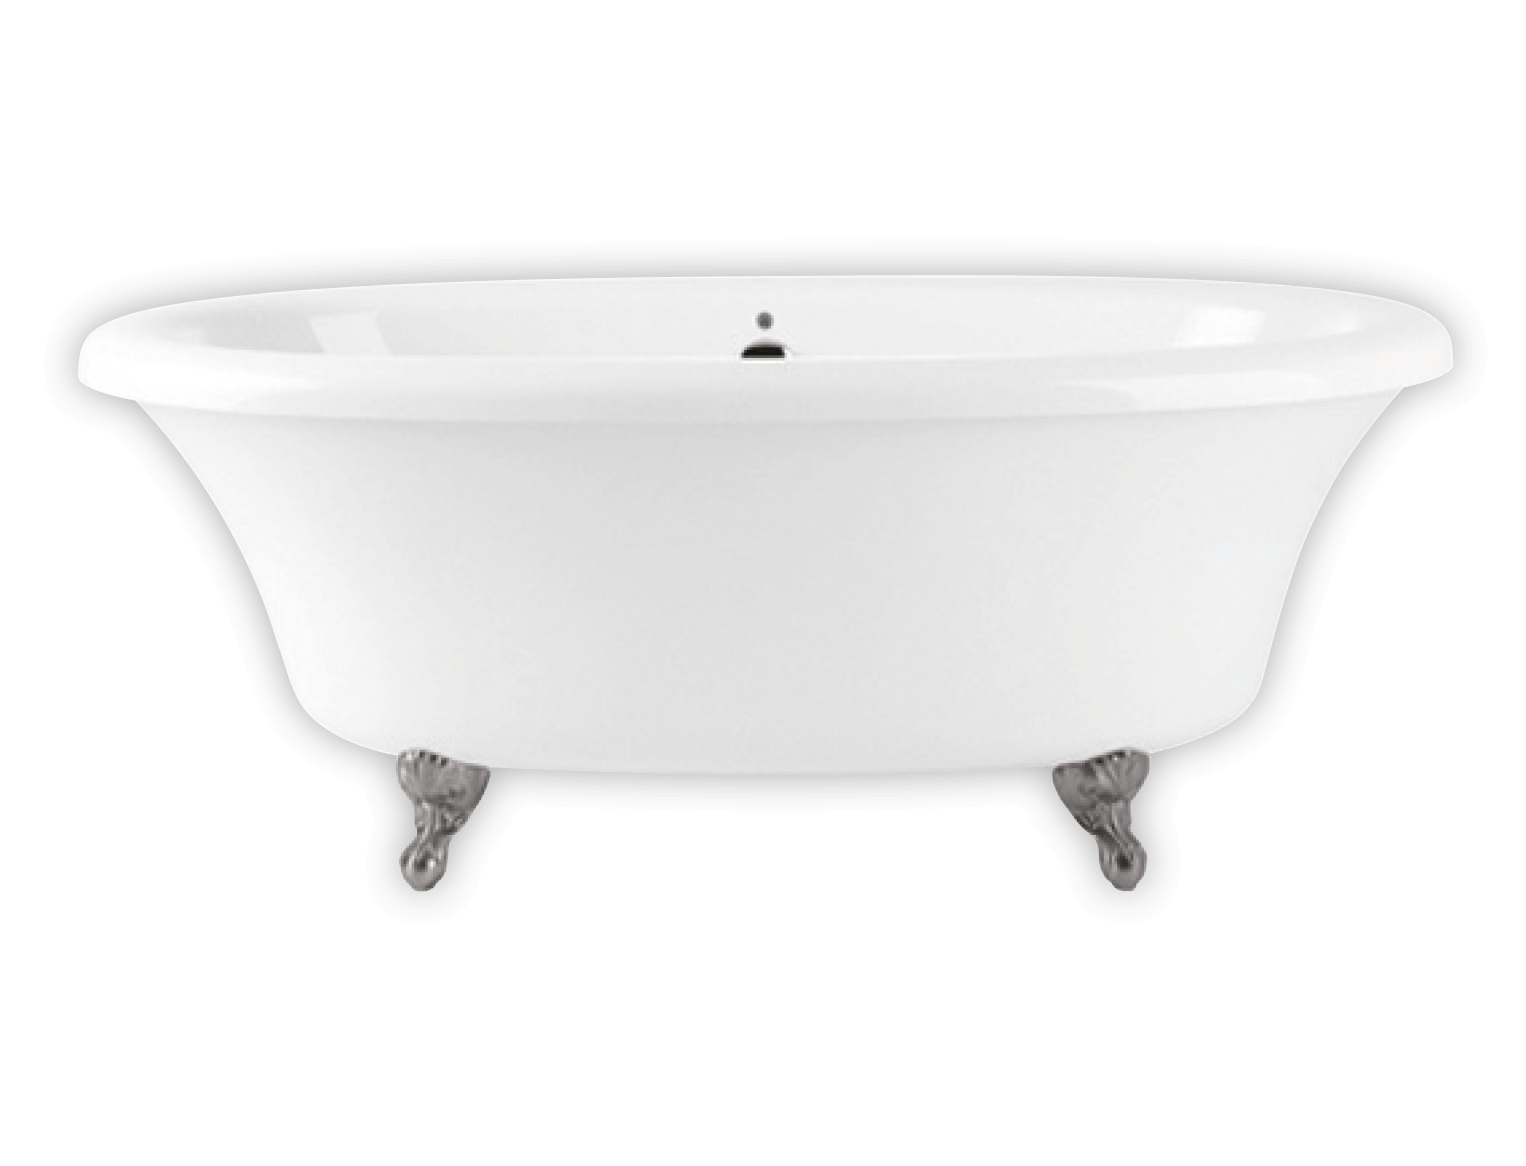 Bainultra Cella 7240 two person large clawfoot air jet bathtub for your modern bathroom